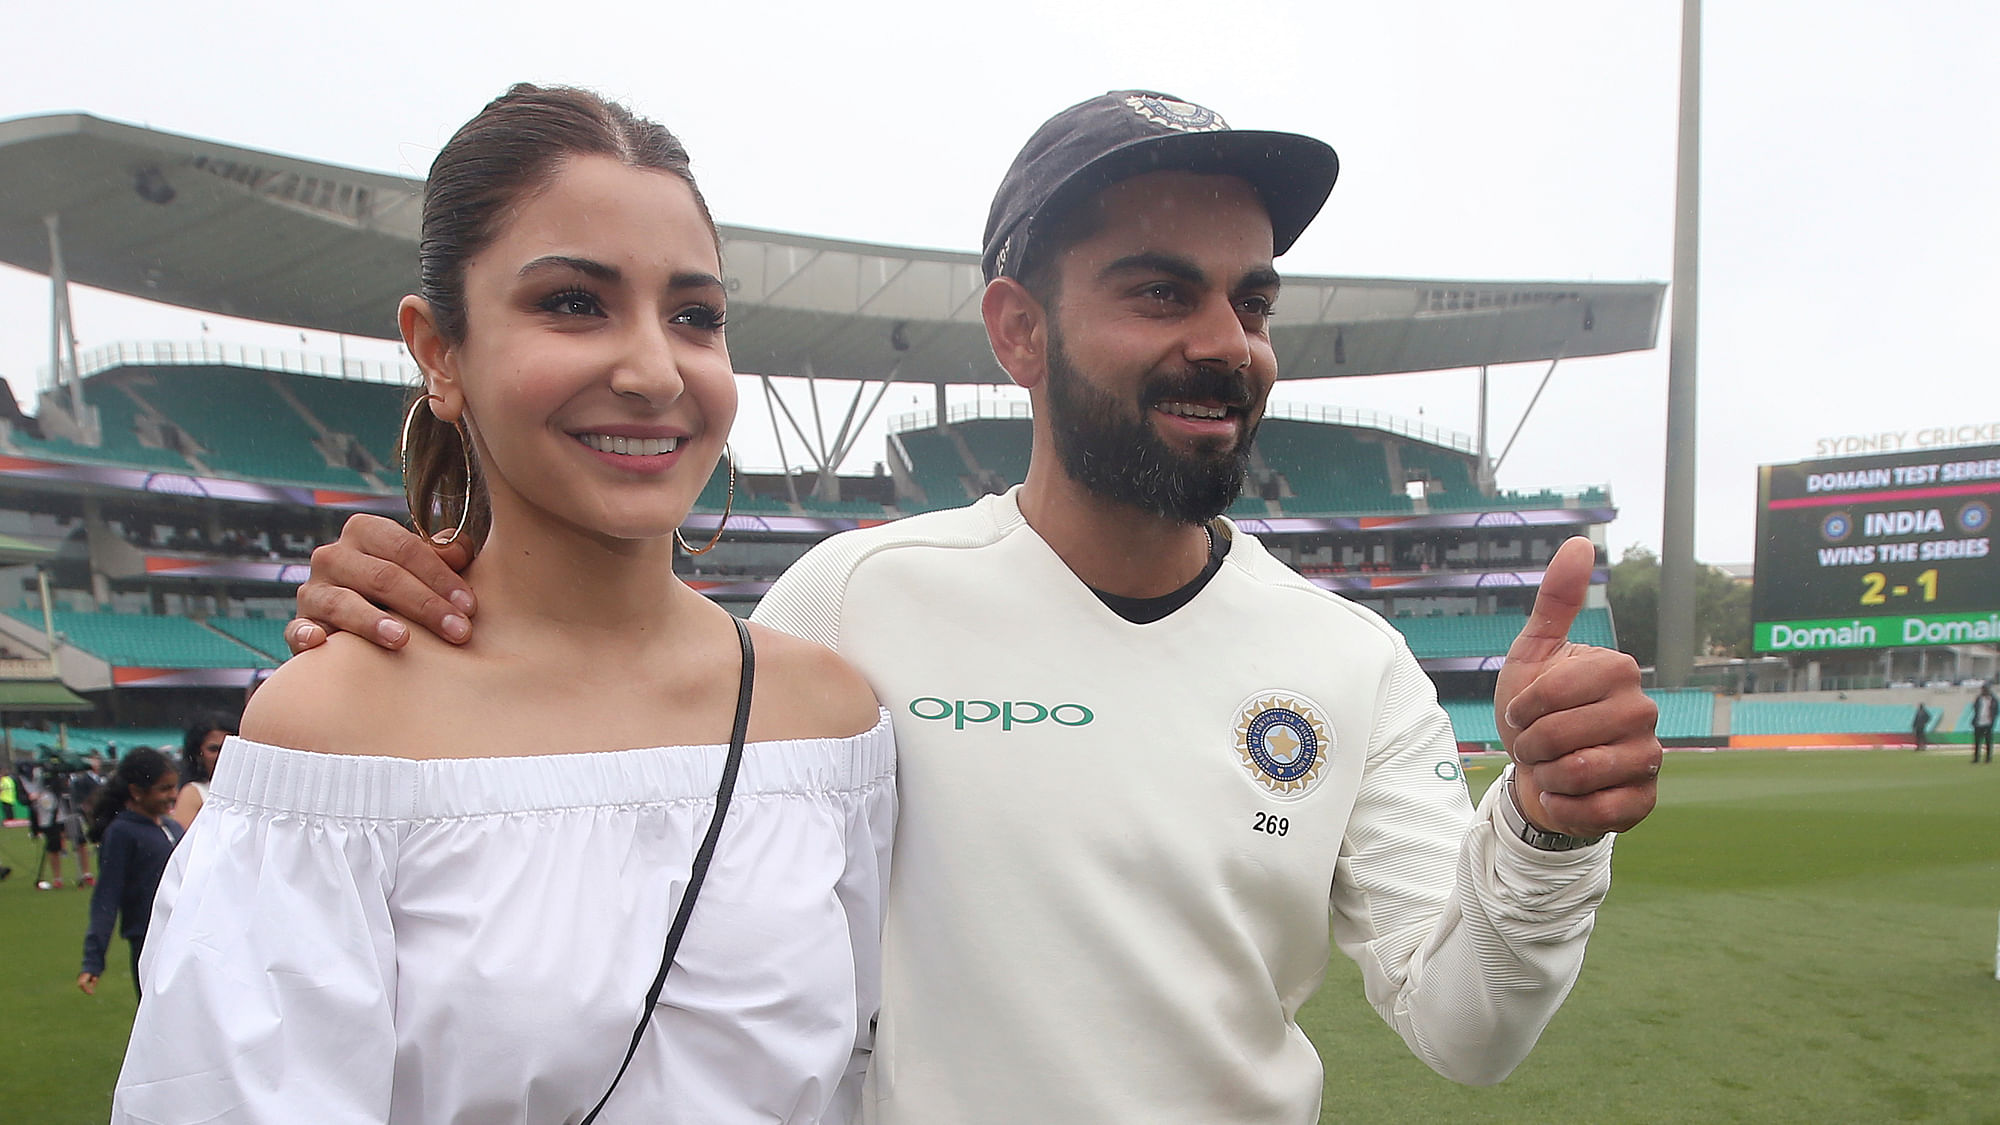 India’s cricket captain Virat Kohli, right, walks with his wife, Anushka Sharma celebrates India’s series win over Australia after play was called off on day 5 of their cricket test match in Sydney, Monday, Jan. 7, 2019.&nbsp;